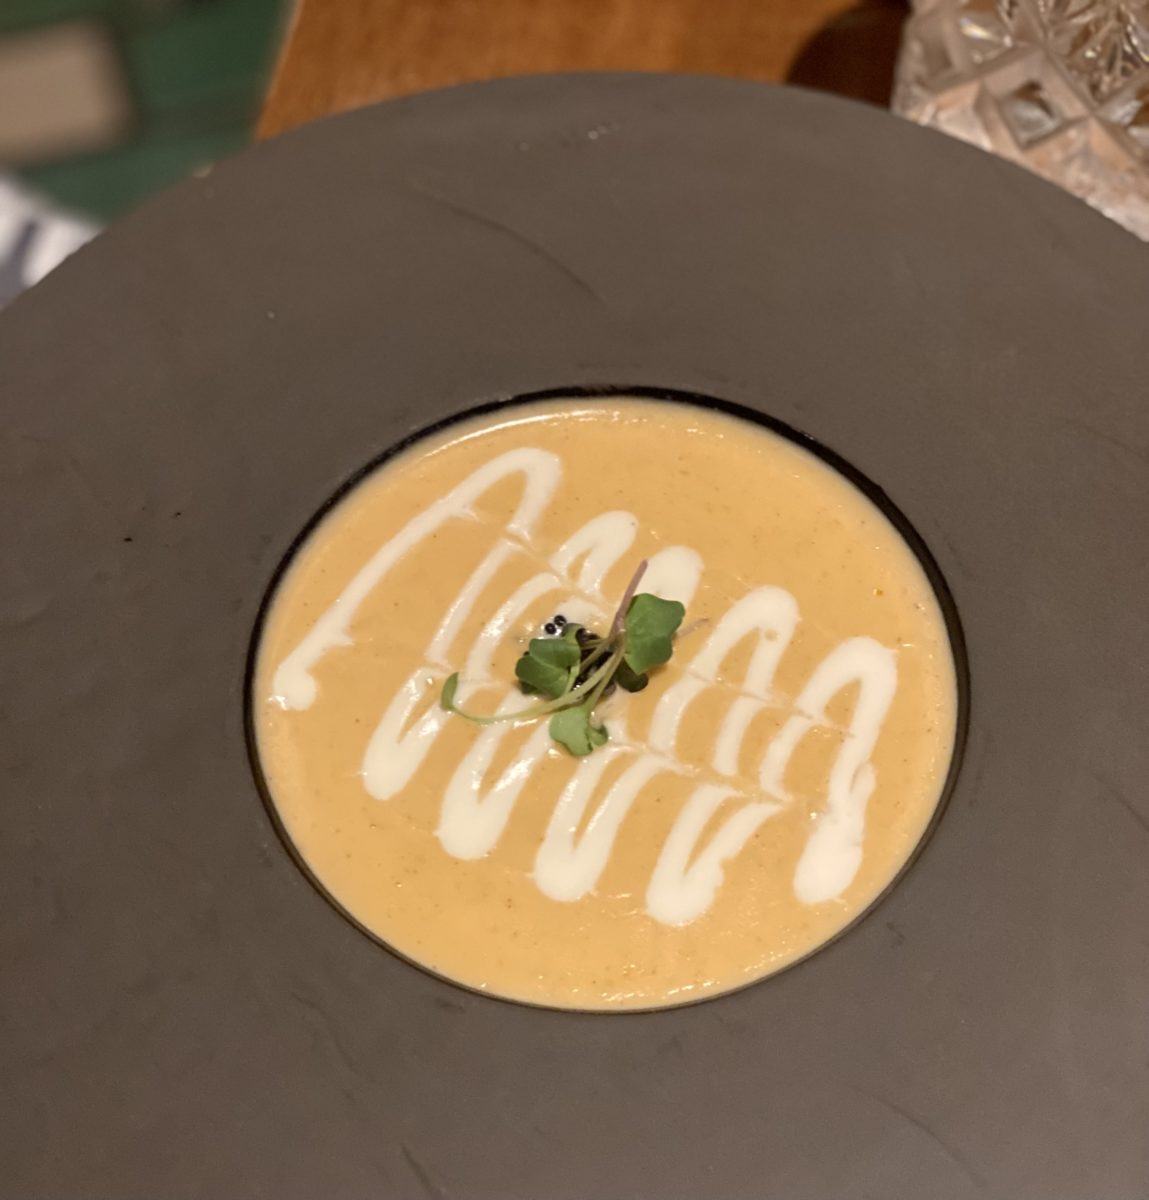 a matter black modern bowl filled with squash puree and a white drizzle of cream